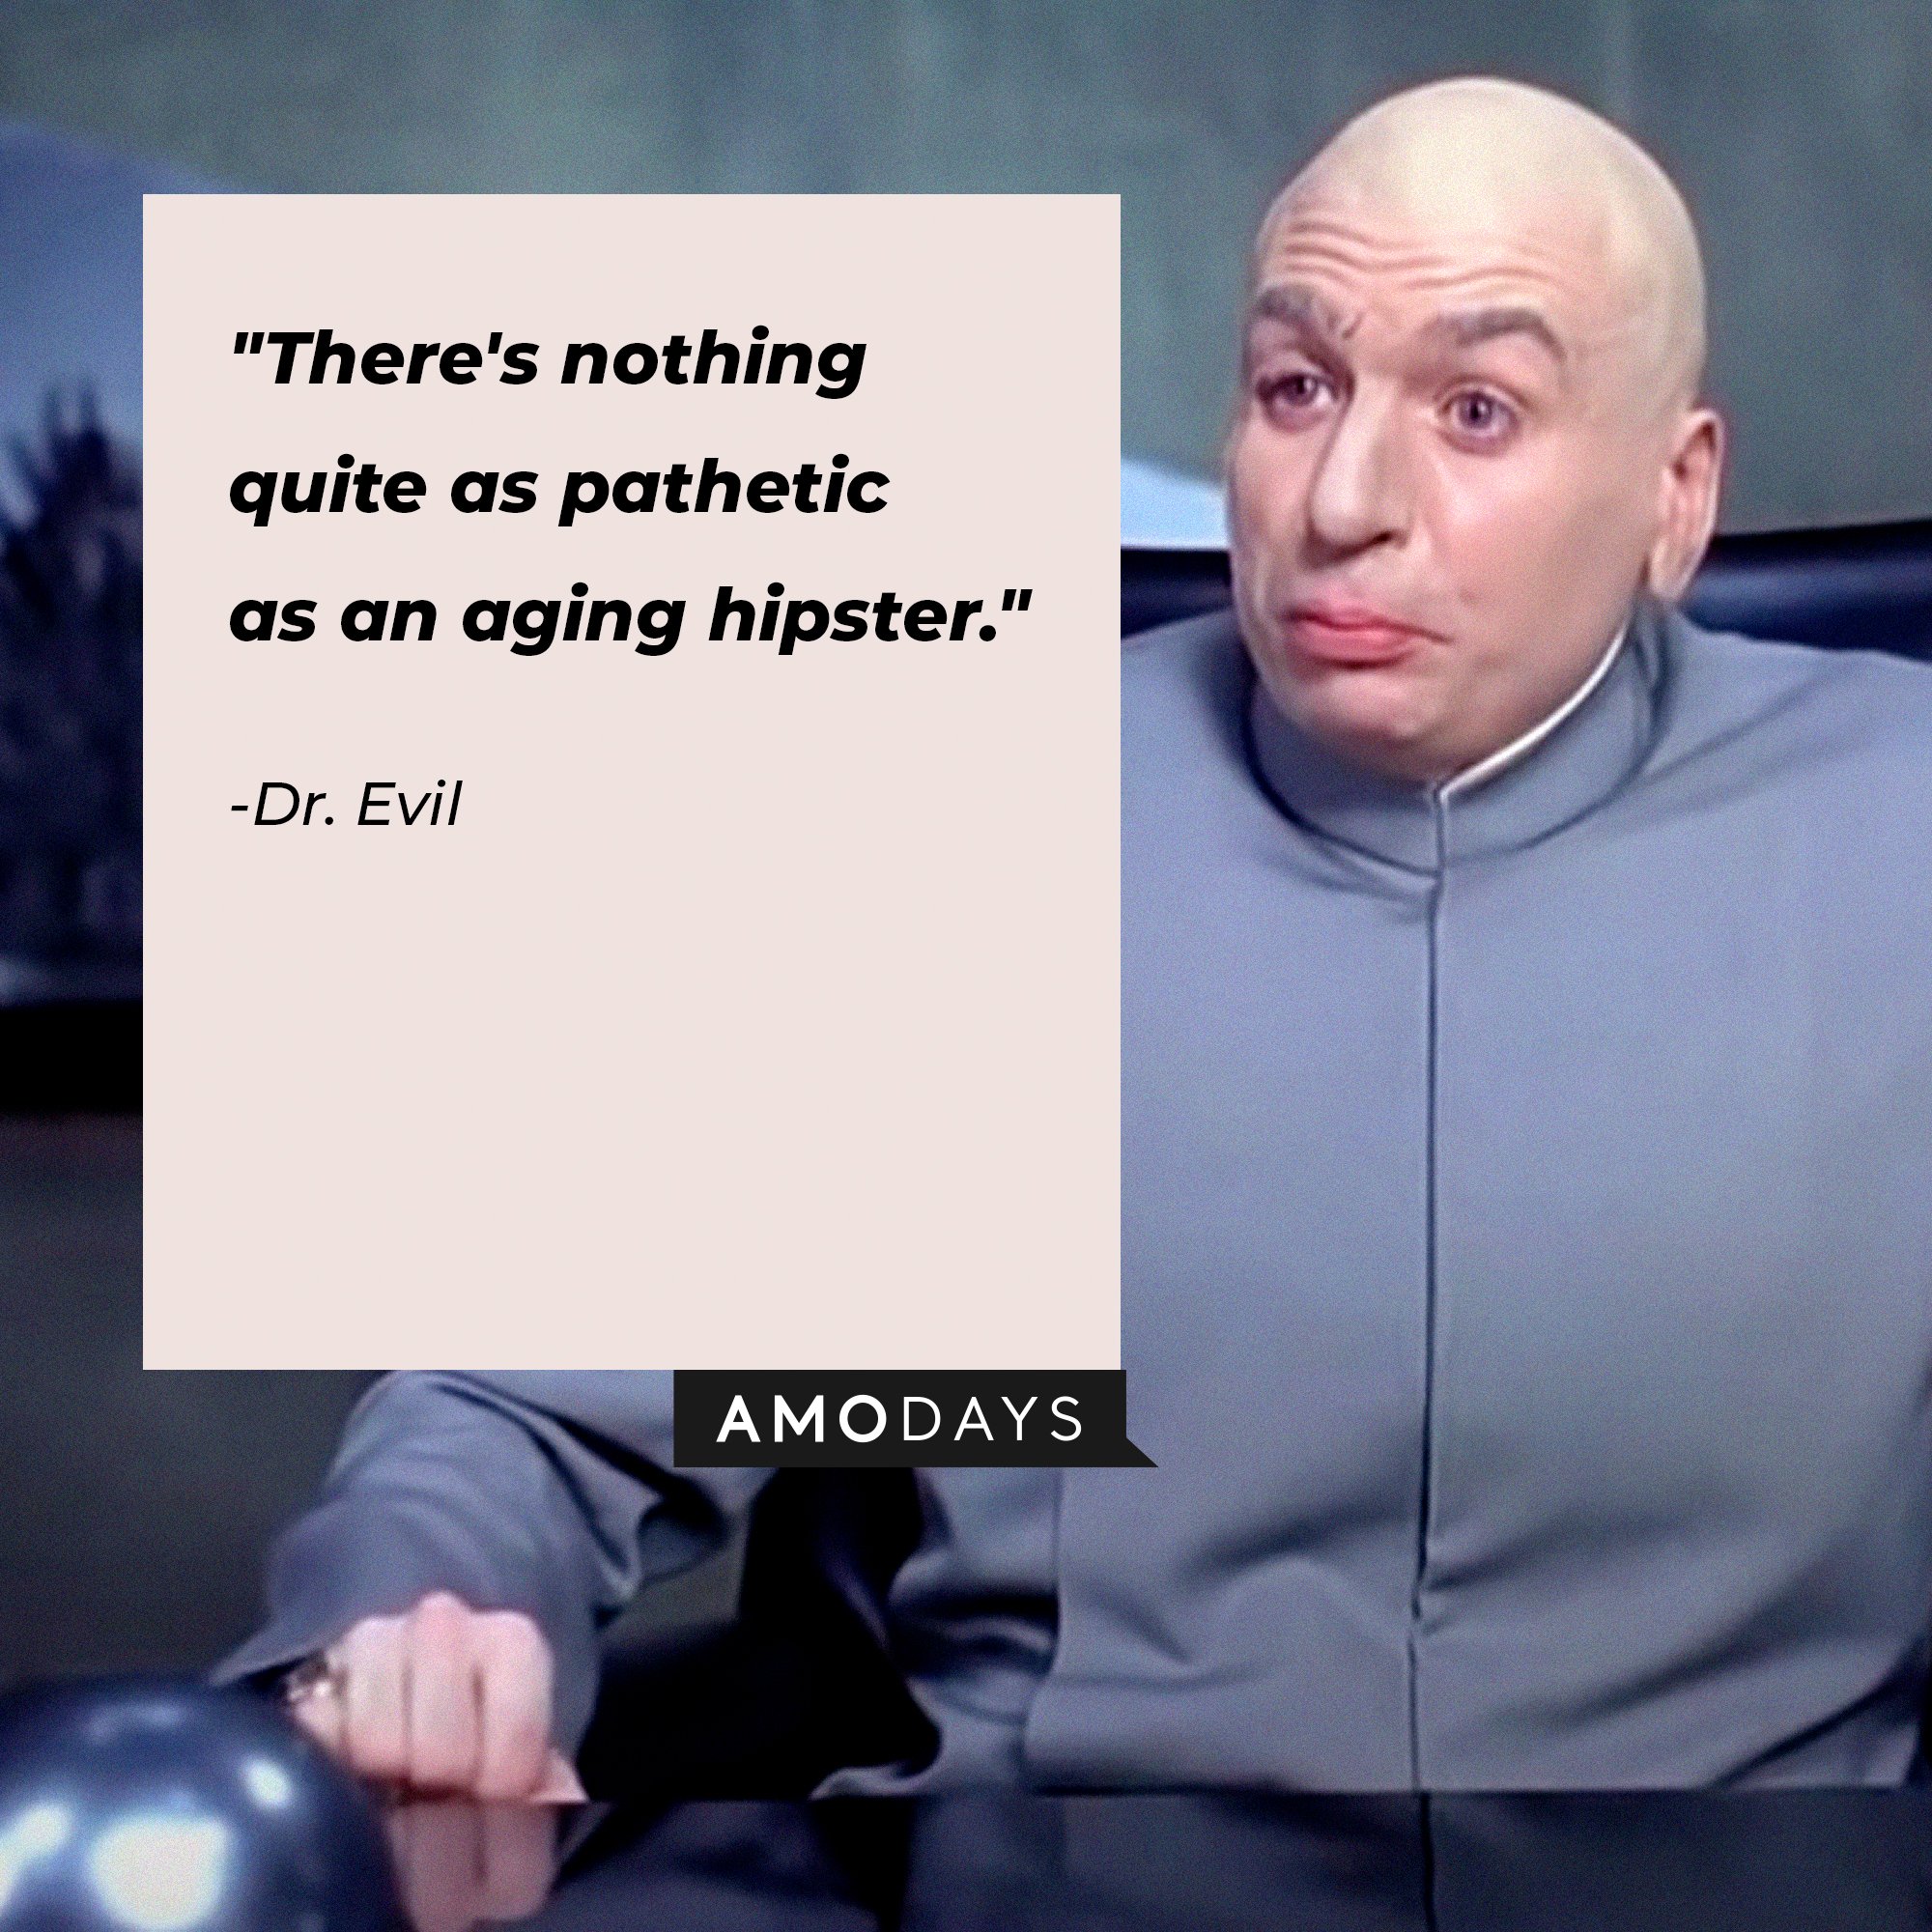  Dr. Evil’s quote: "There's nothing quite as pathetic as an aging hipster." | Image: Amodays